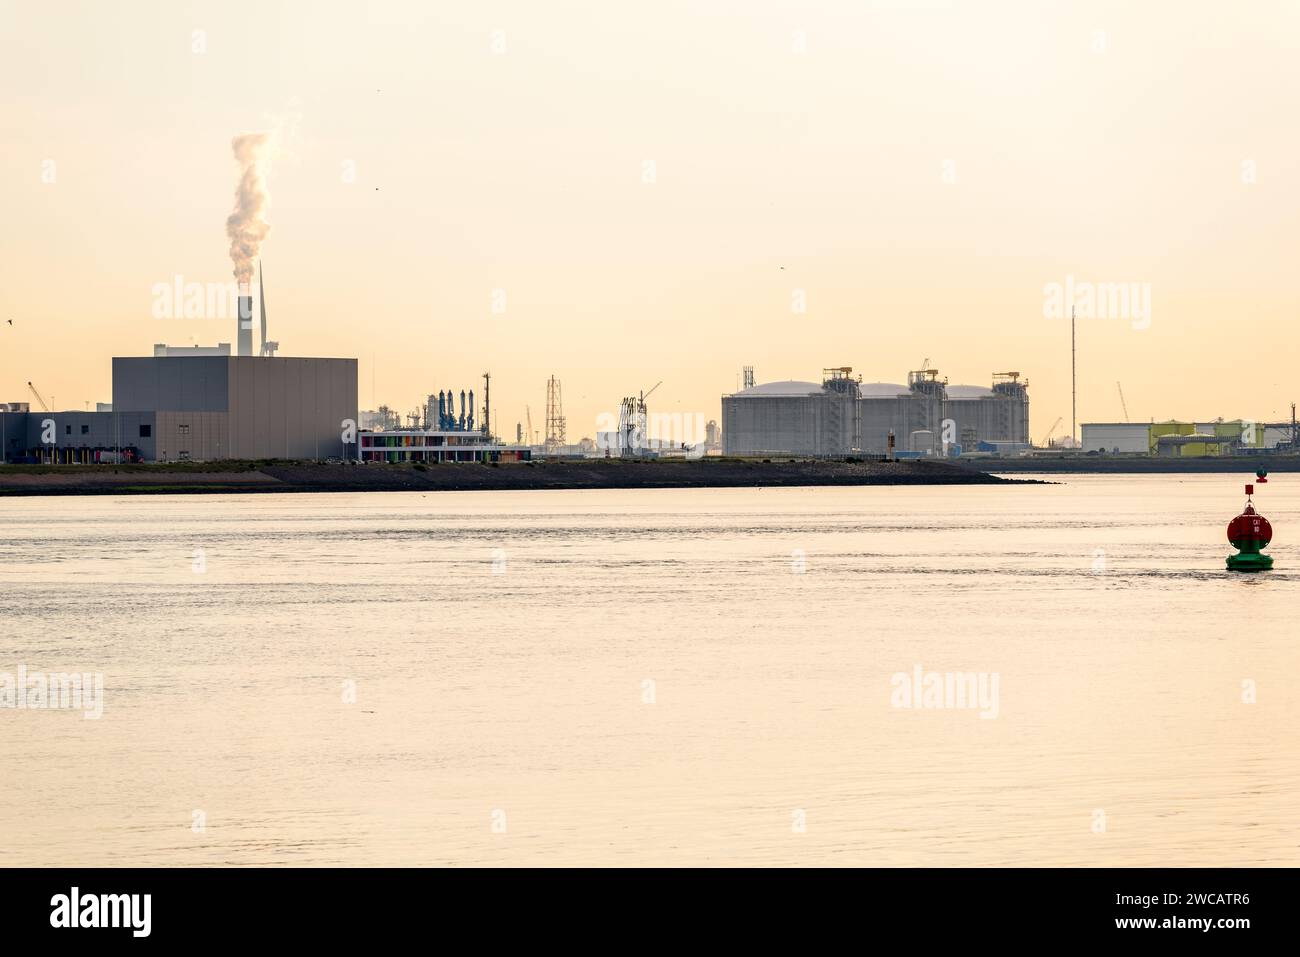 Industrial plants and fuel storage tanks on the quays of a major seaport at sunset Stock Photo